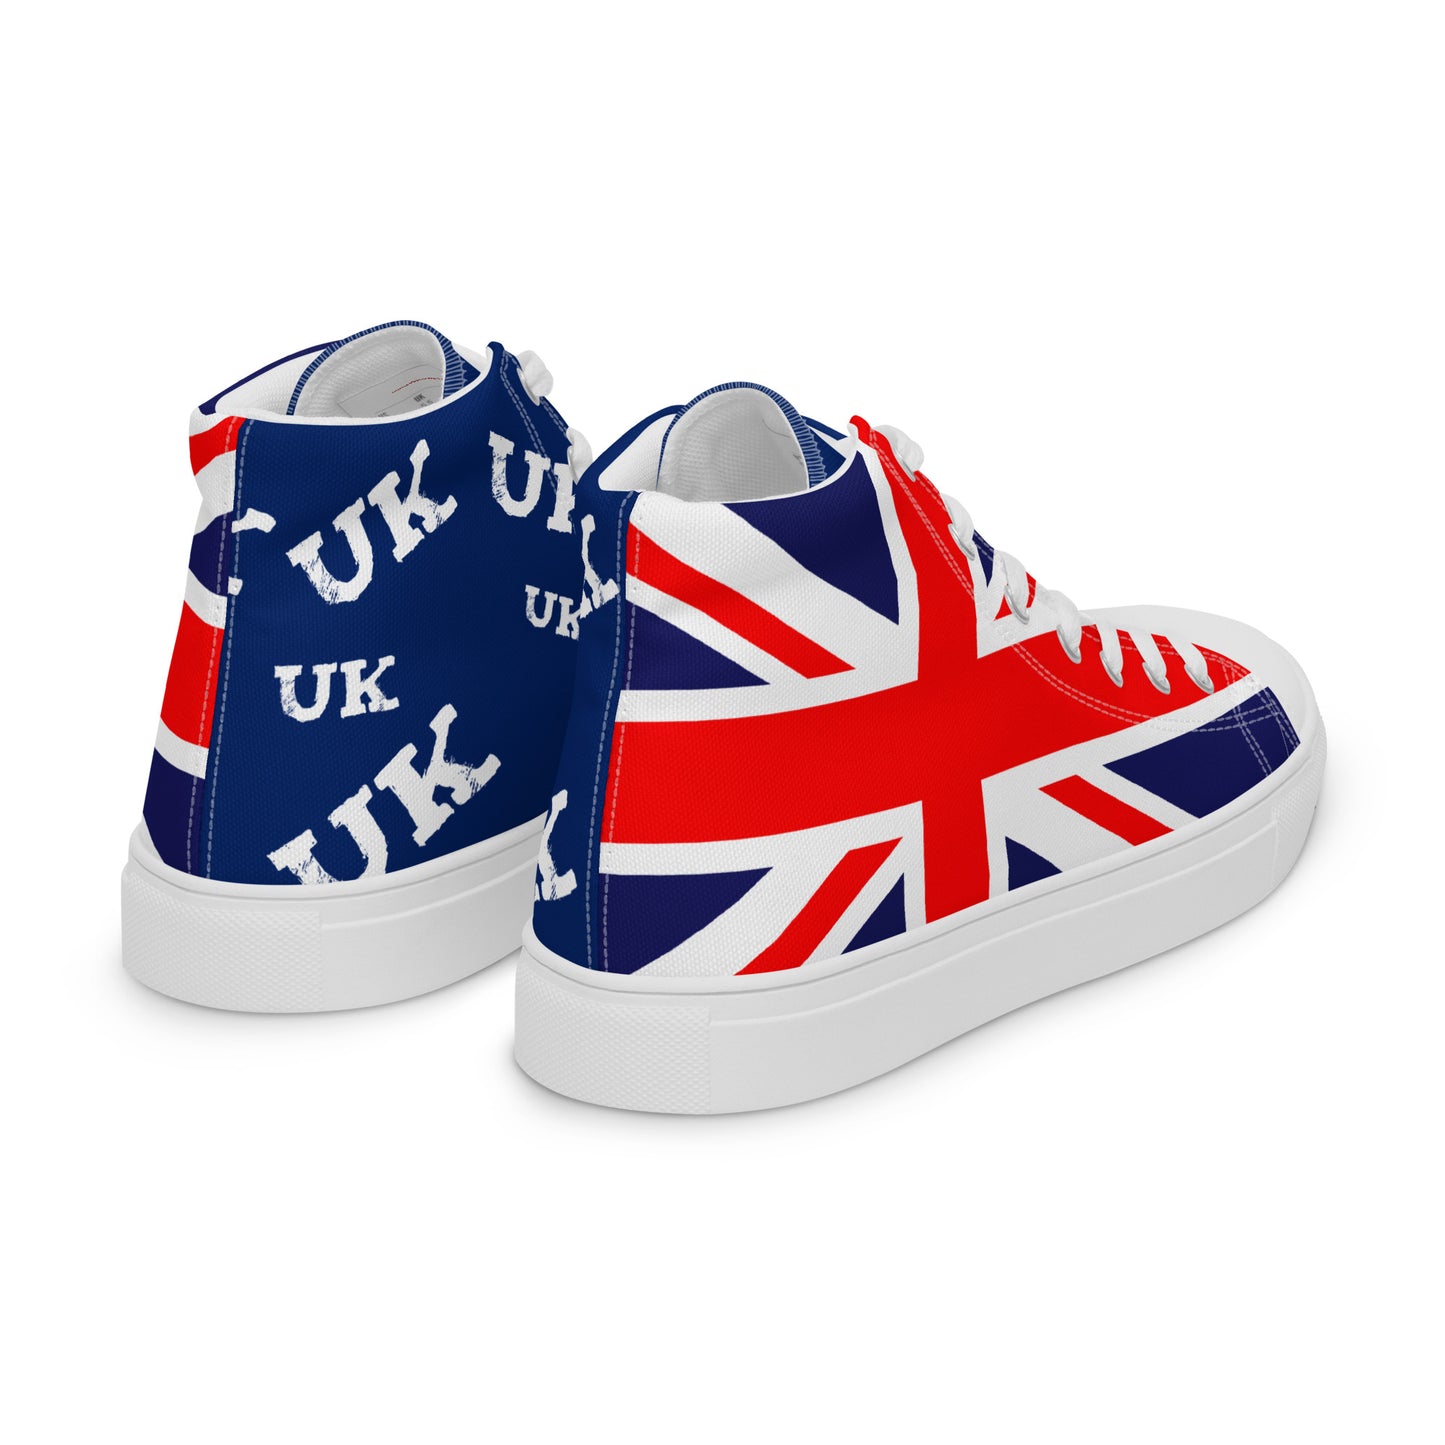 High Top Sneakers For Men With UK Print